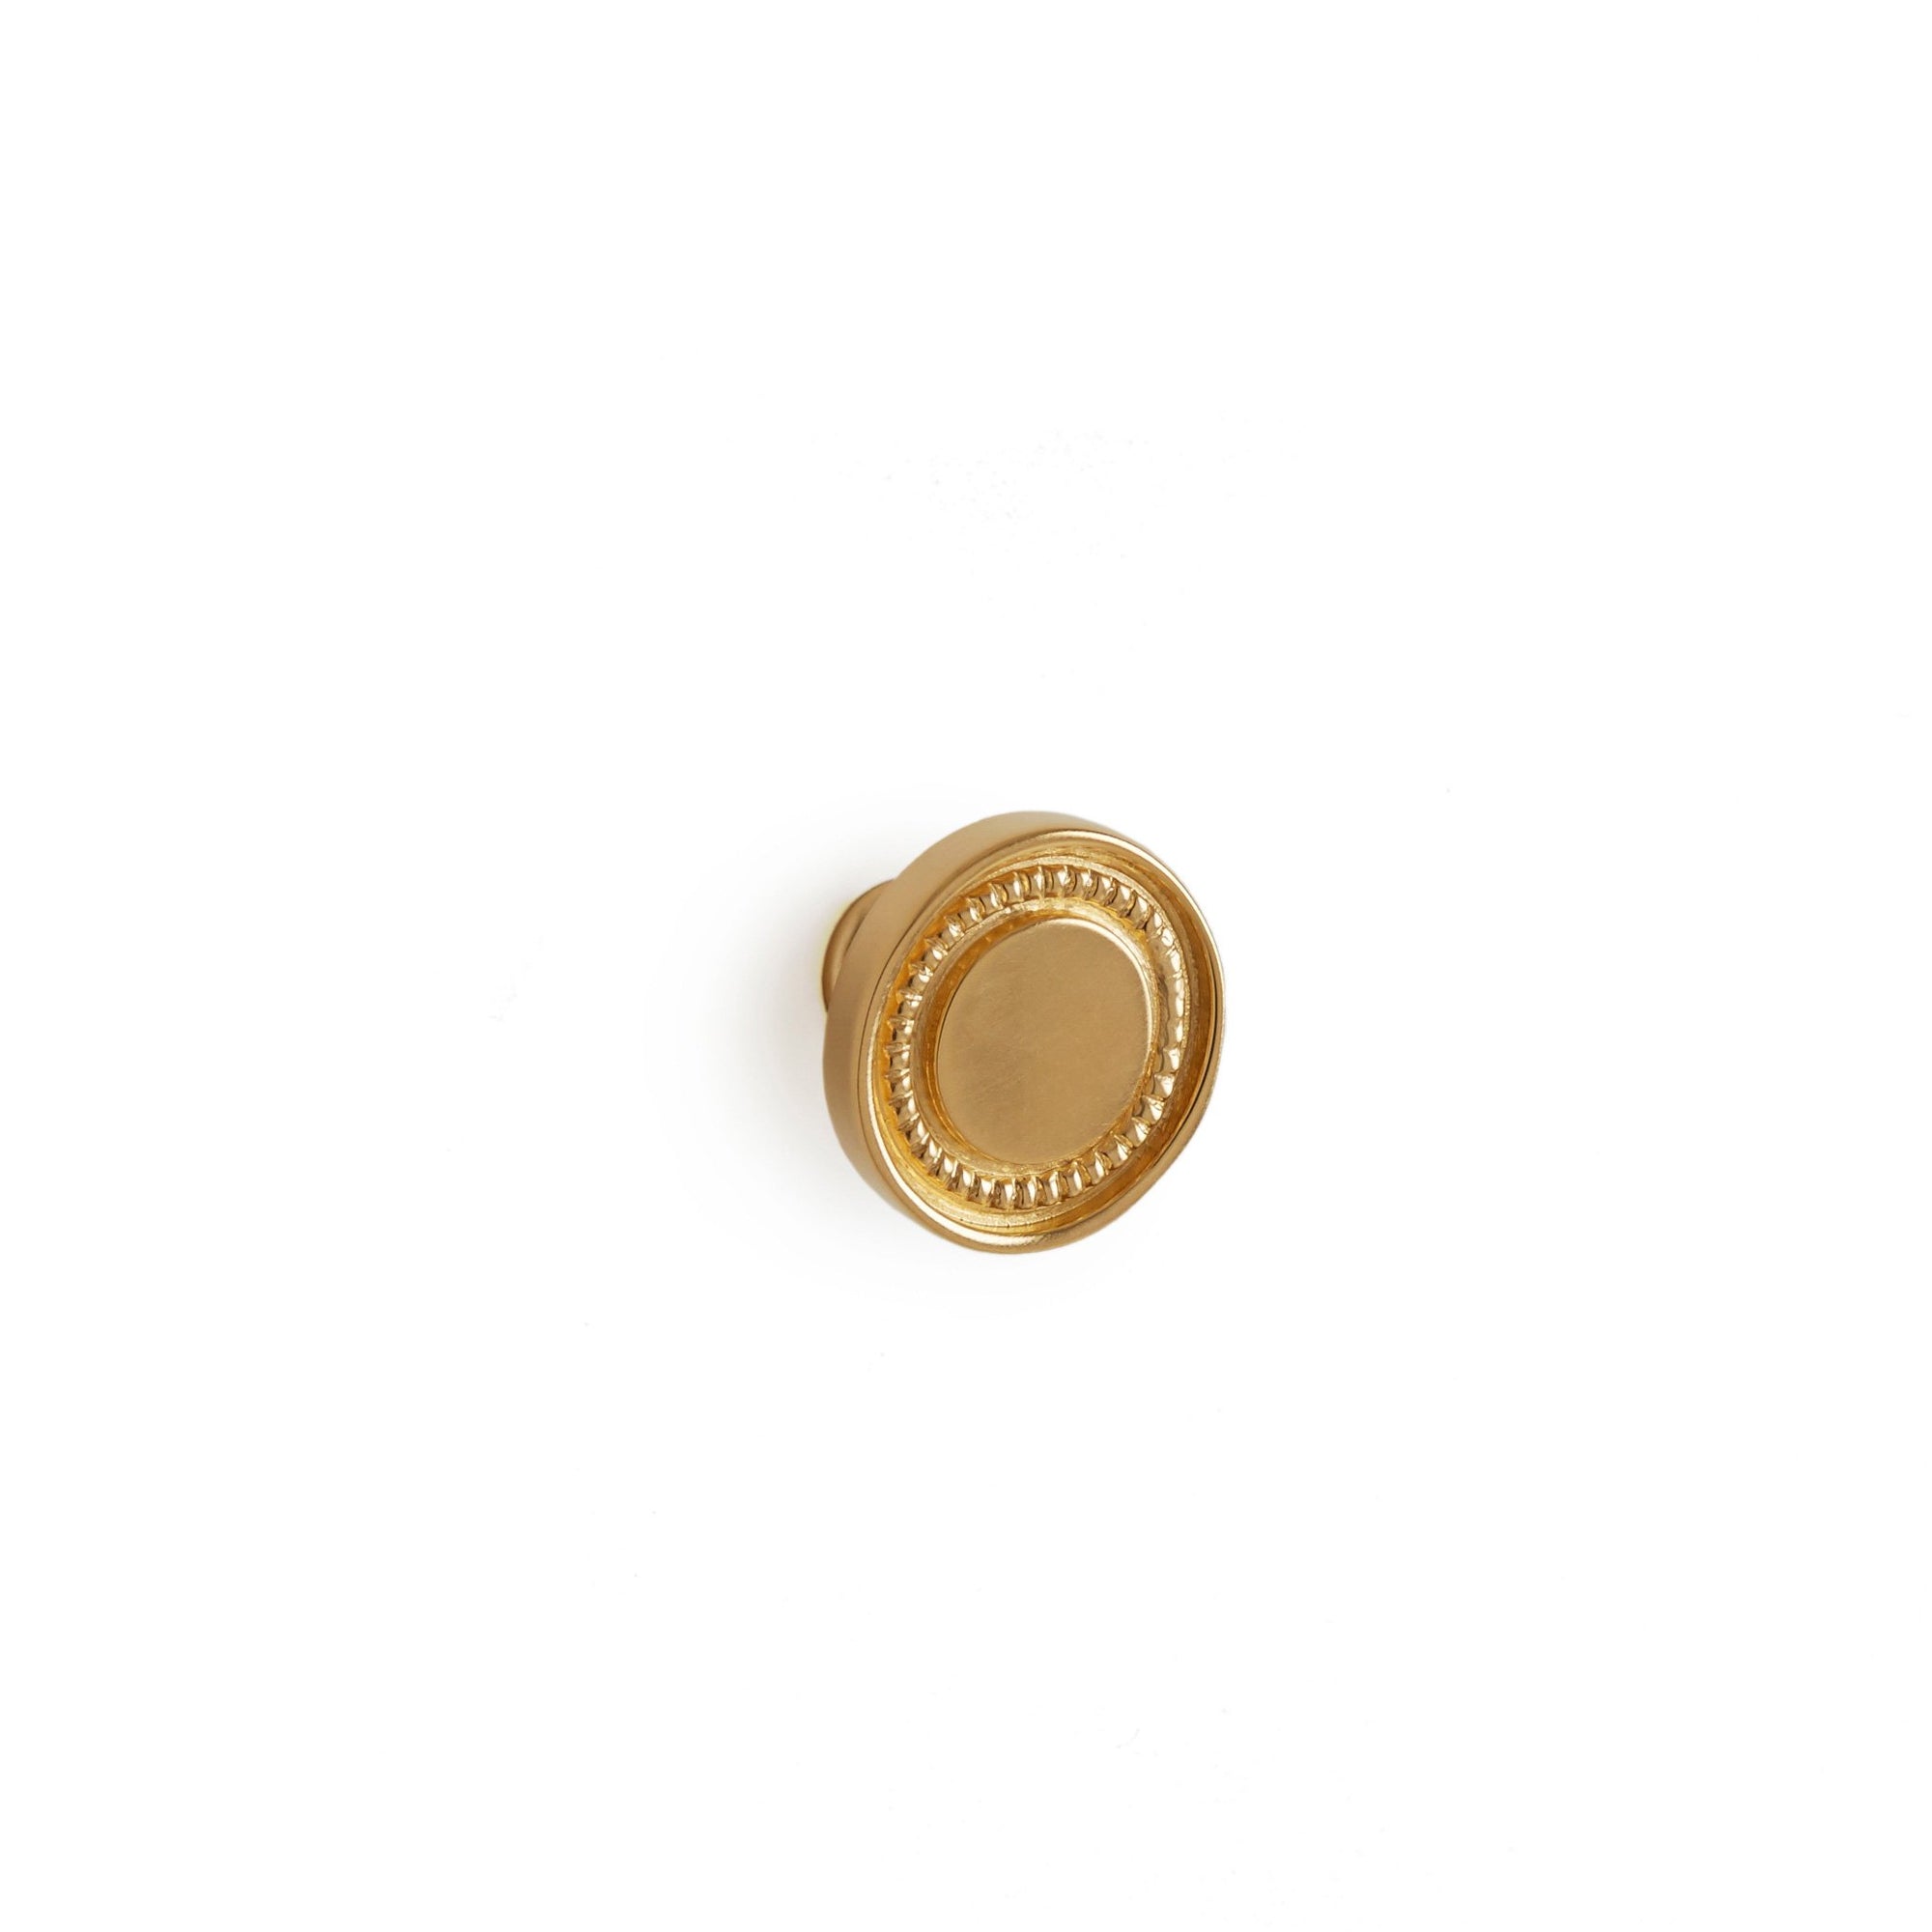 1033-1-GP Sherle Wagner International Concentric Circles Small Cabinet & Drawer Knob in Gold Plate metal finish